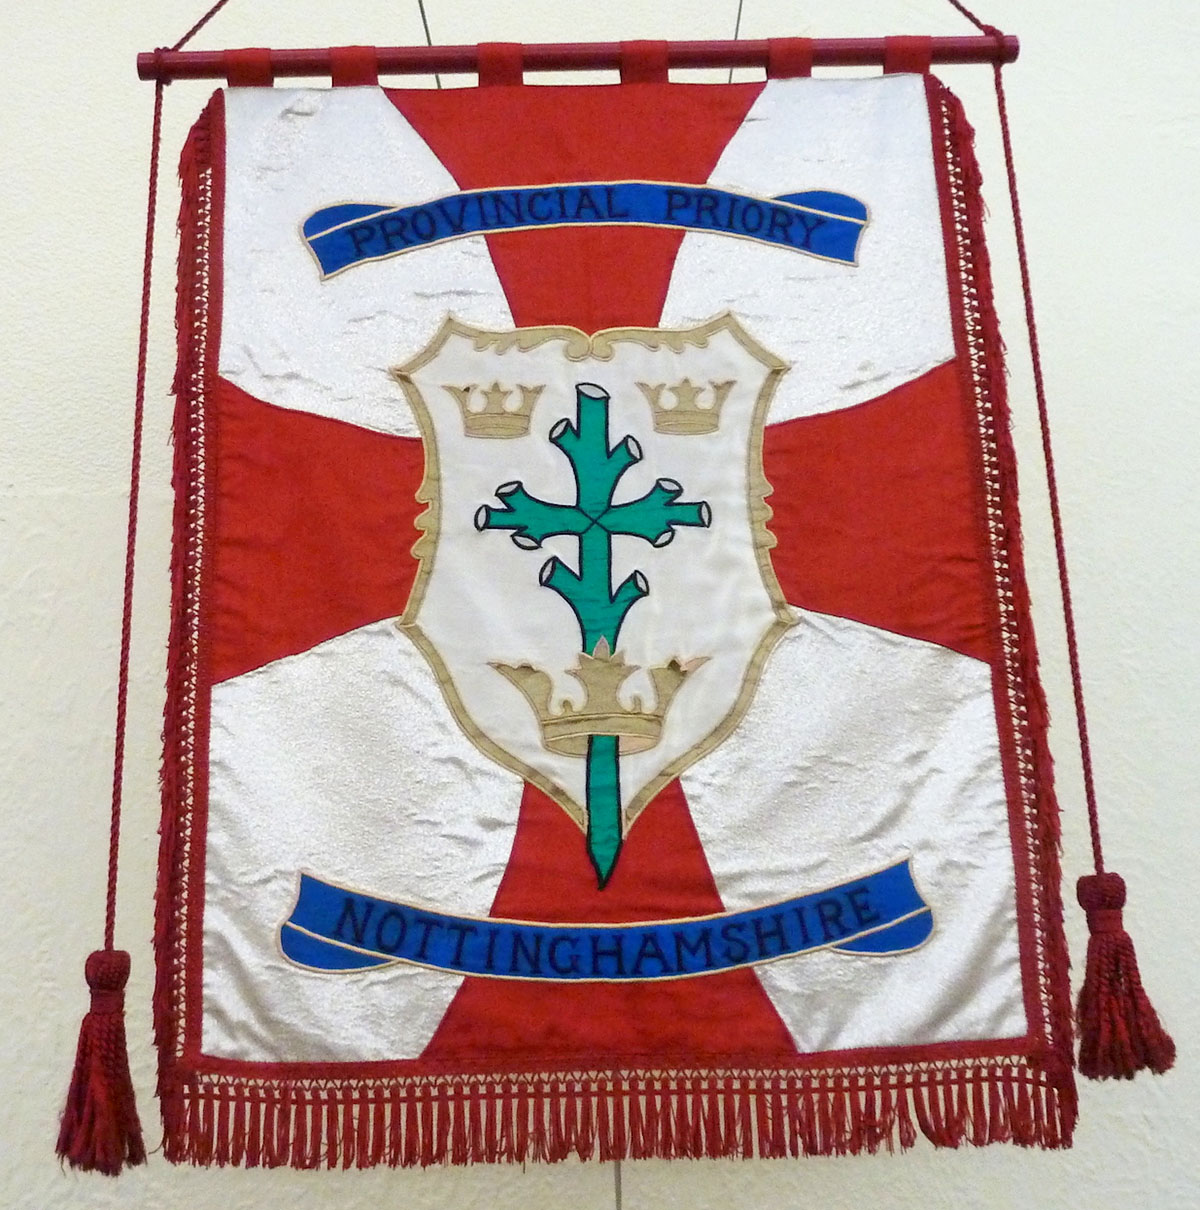 The Provincial Priory of Nottinghamshire